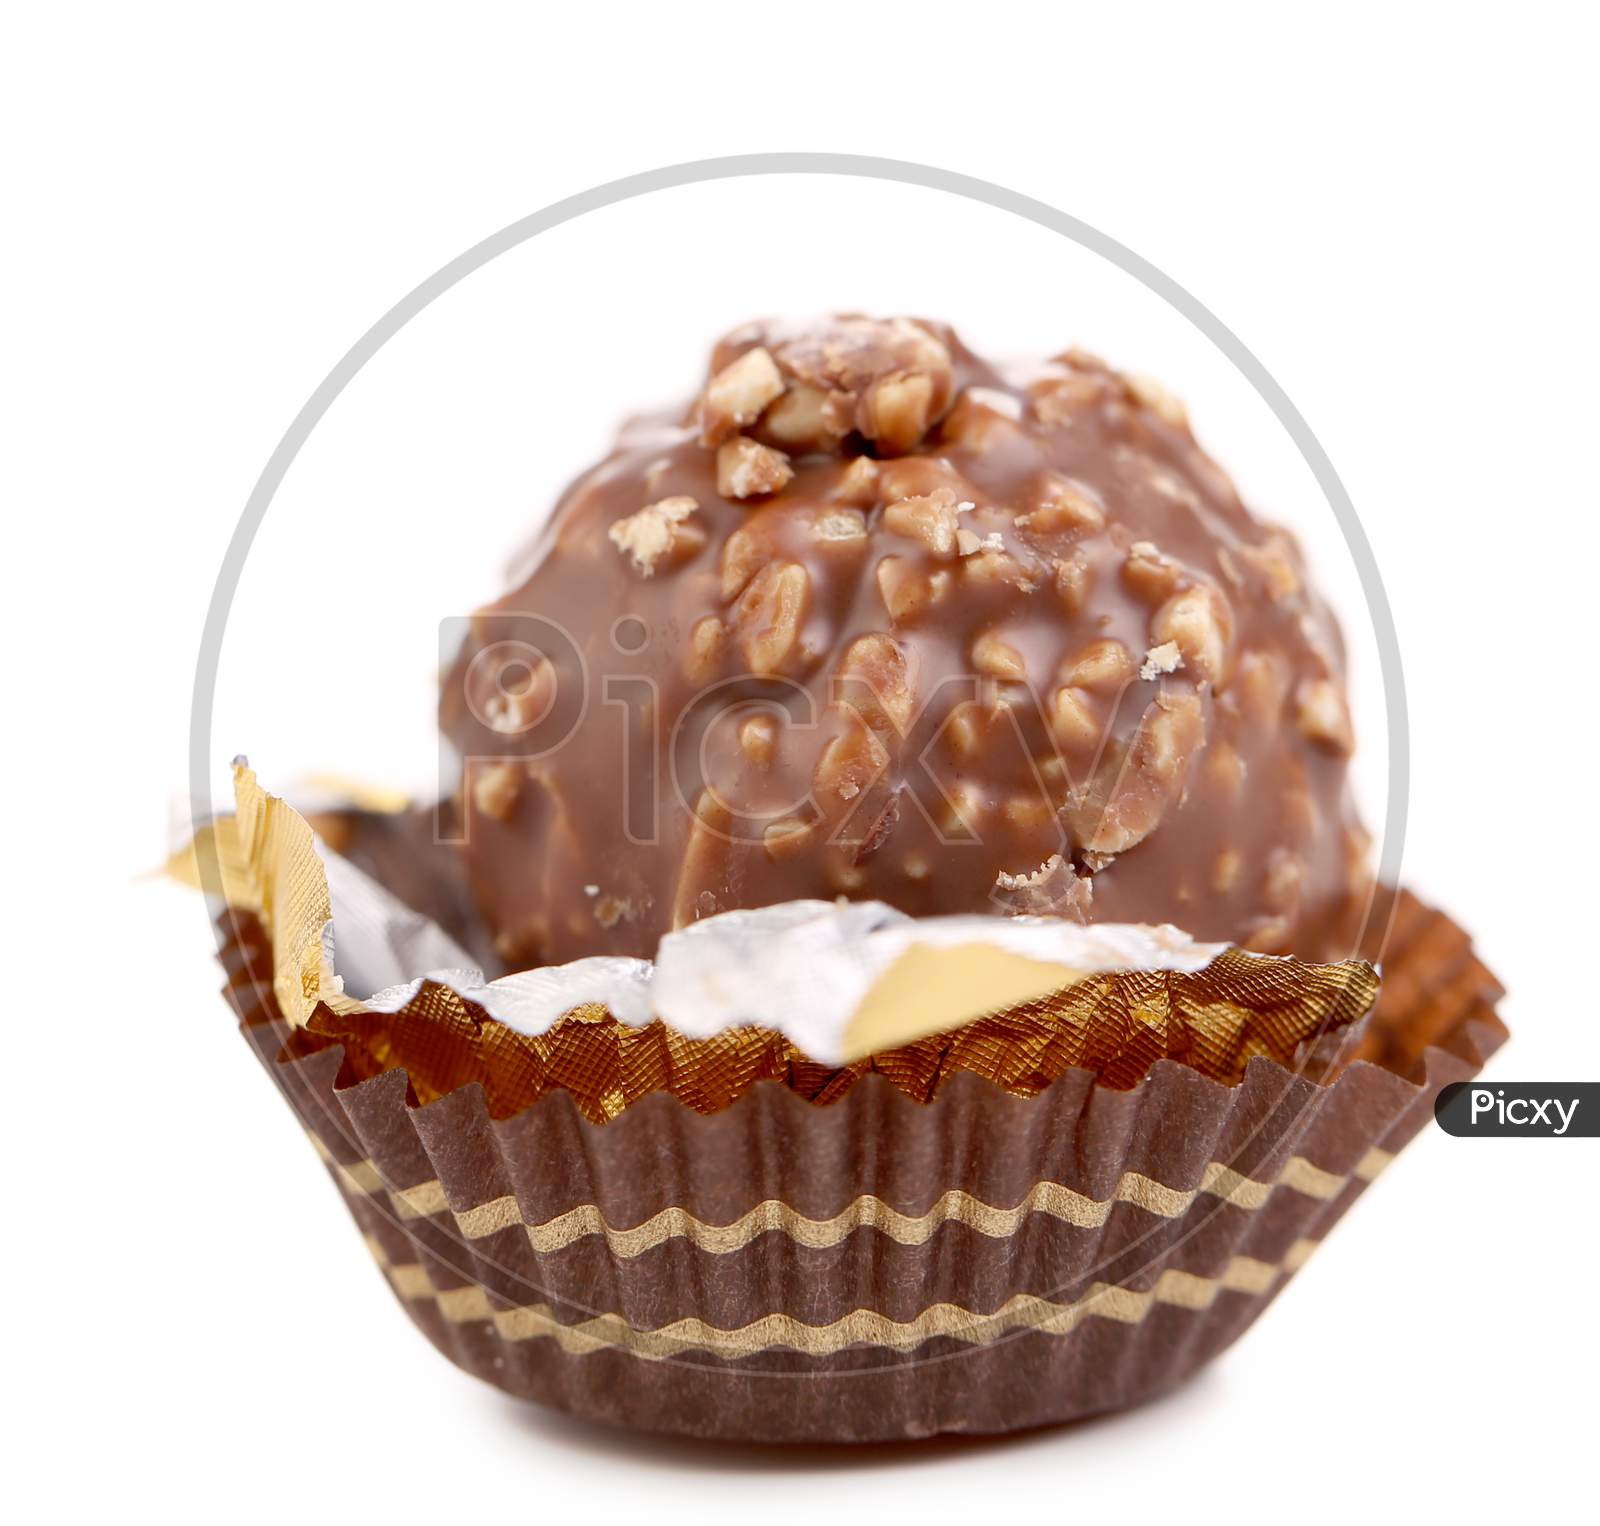 Chocolate Gold Bonbon With Nuts. Isolated On A White Background.